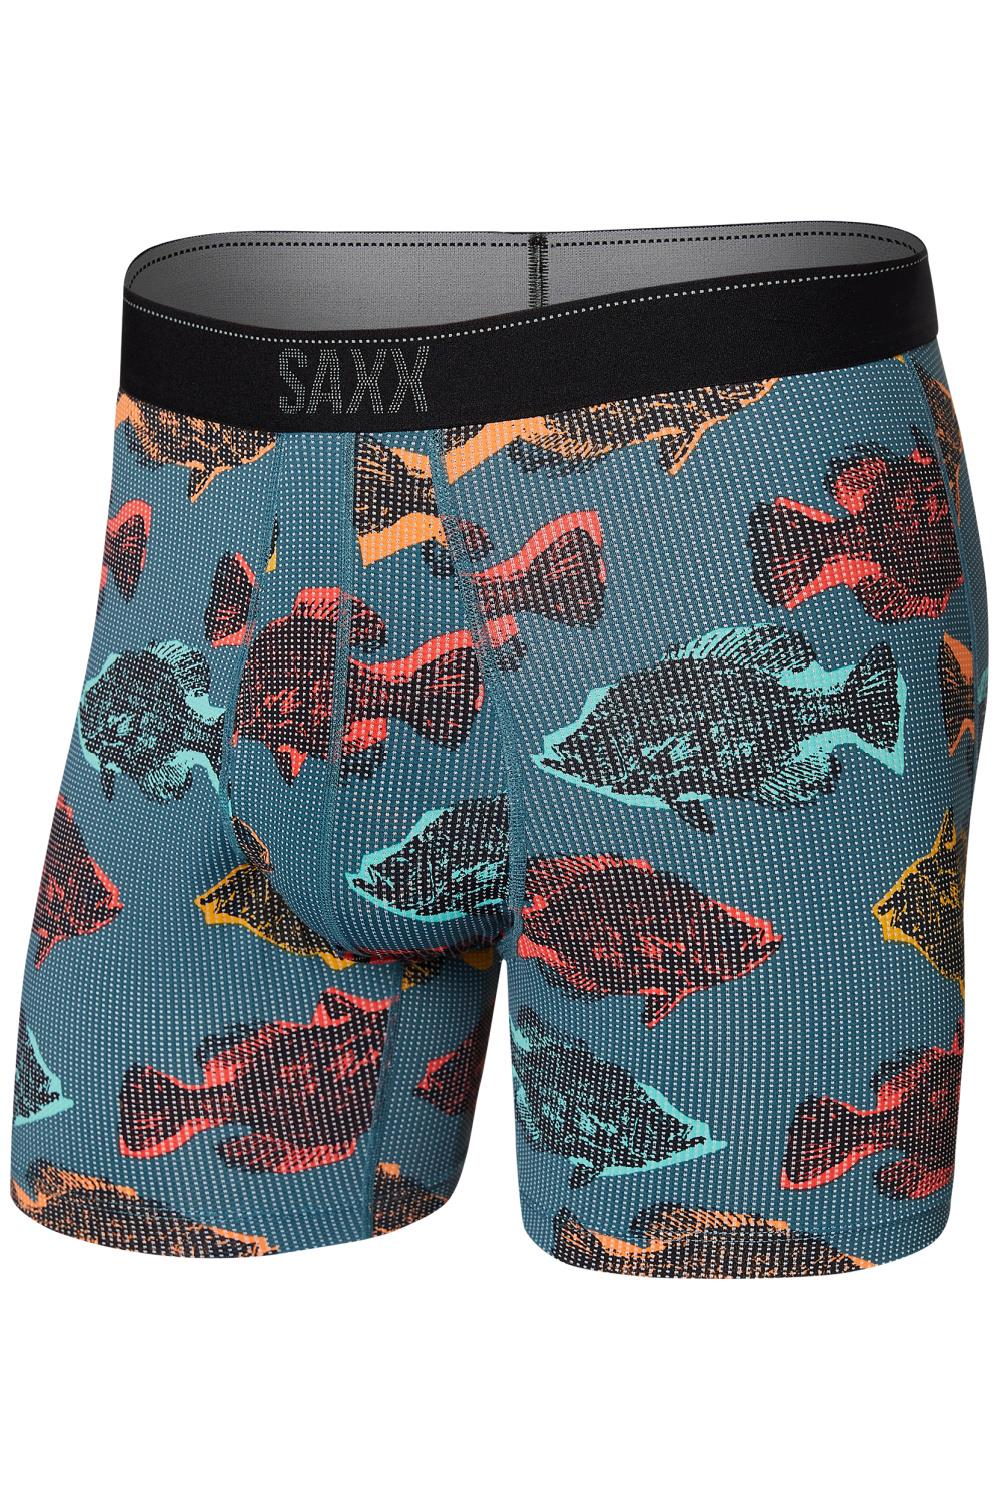 SAXX Ultra Boxer Brief SXBB30F-SCS – My Top Drawer